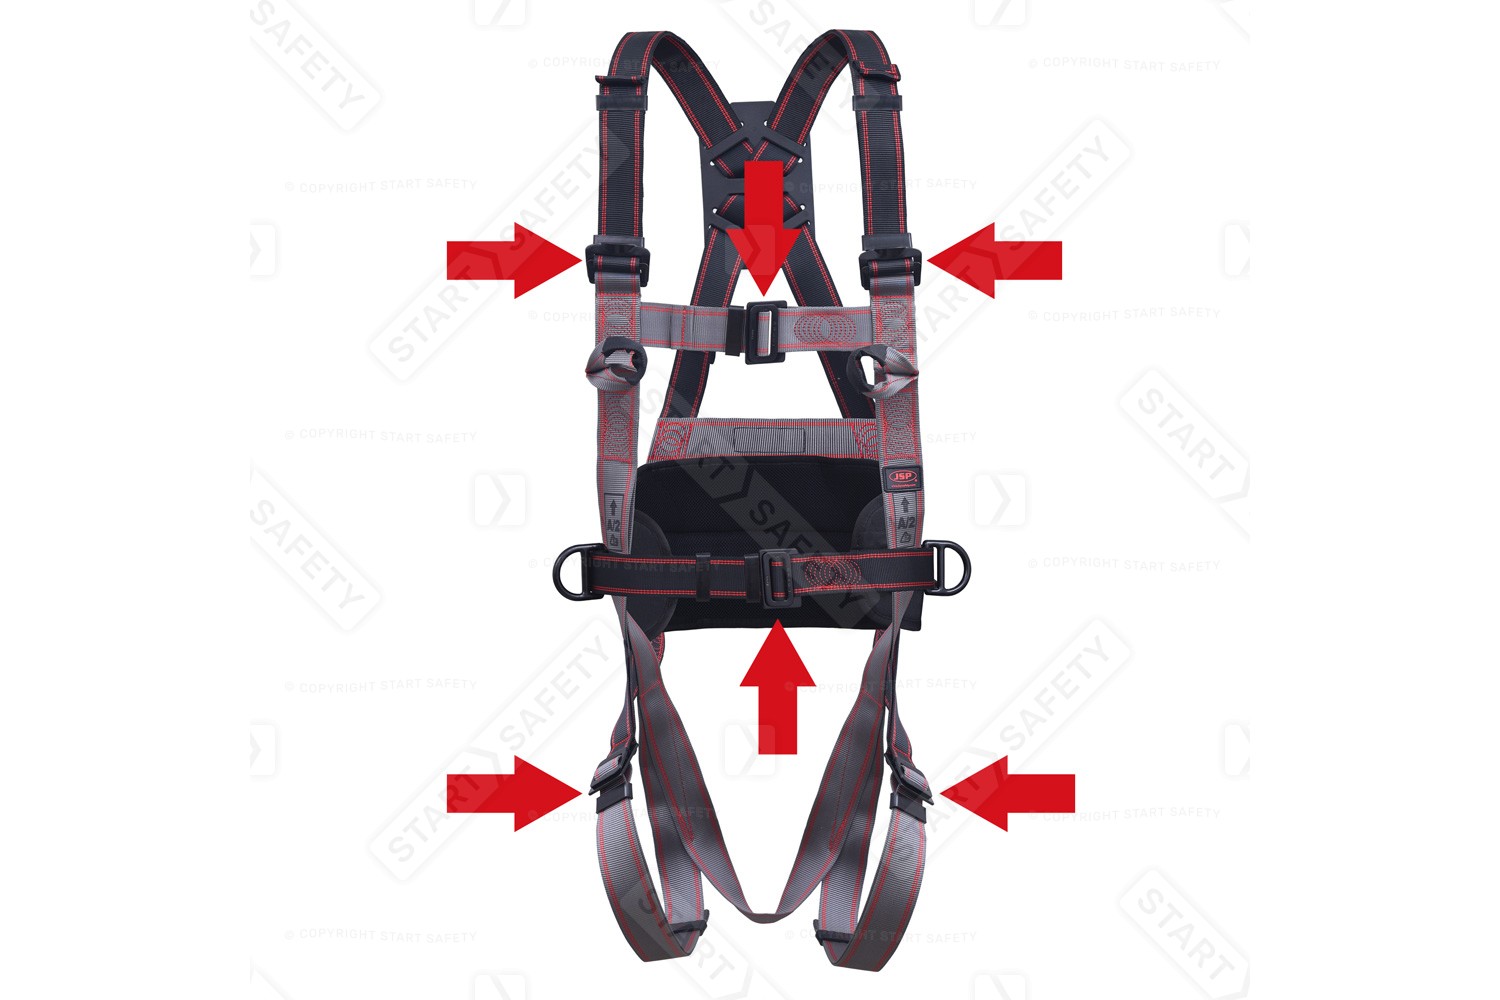 6 Adjustment Points On The JSP Pioneeer 3-Point Harness